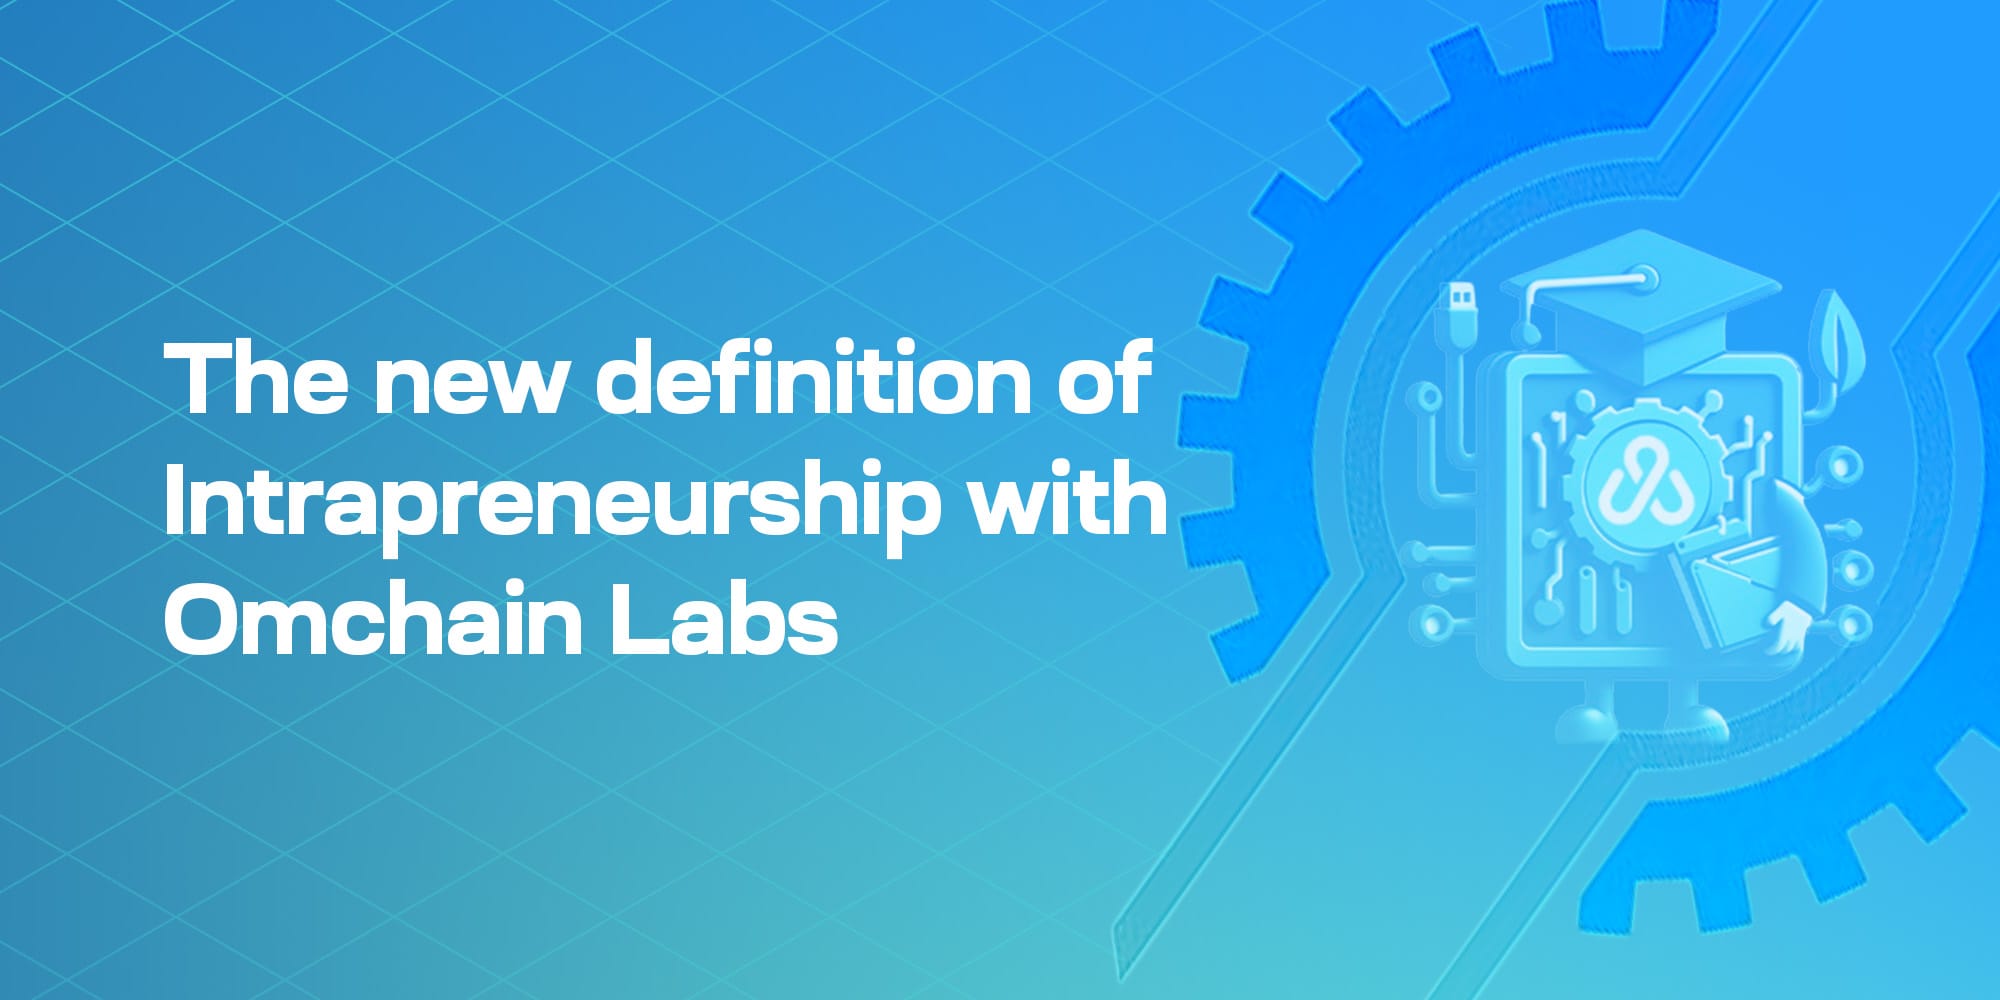 The new definition of Intrapreneurship with Omchain Labs